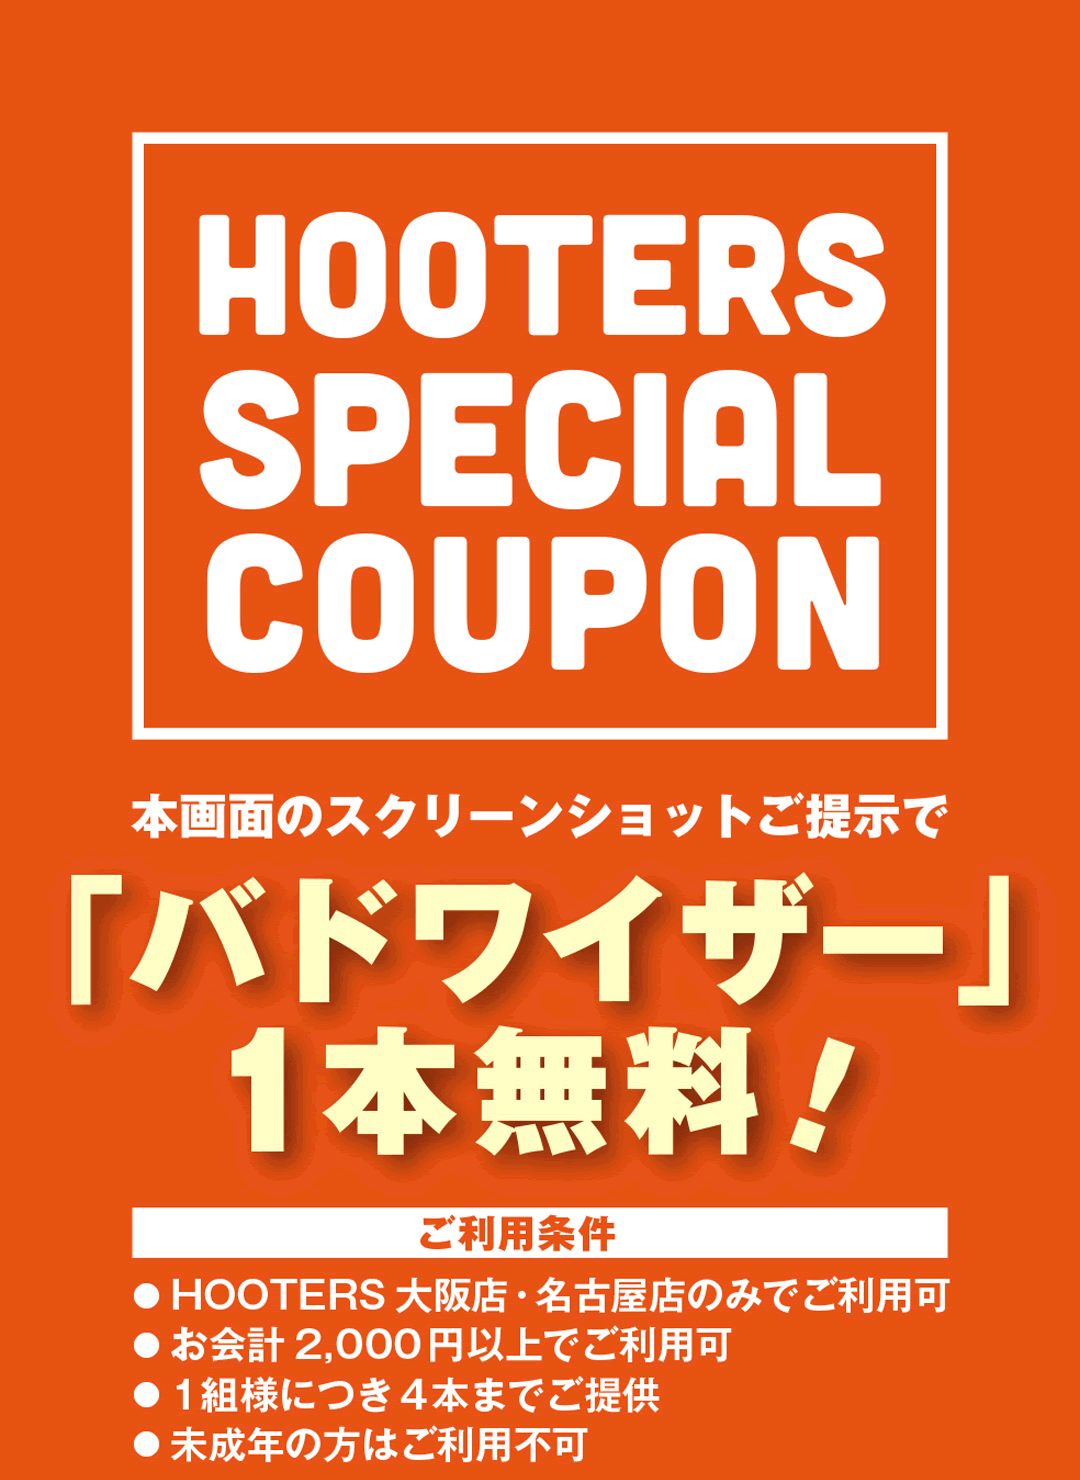 hooters special coupon